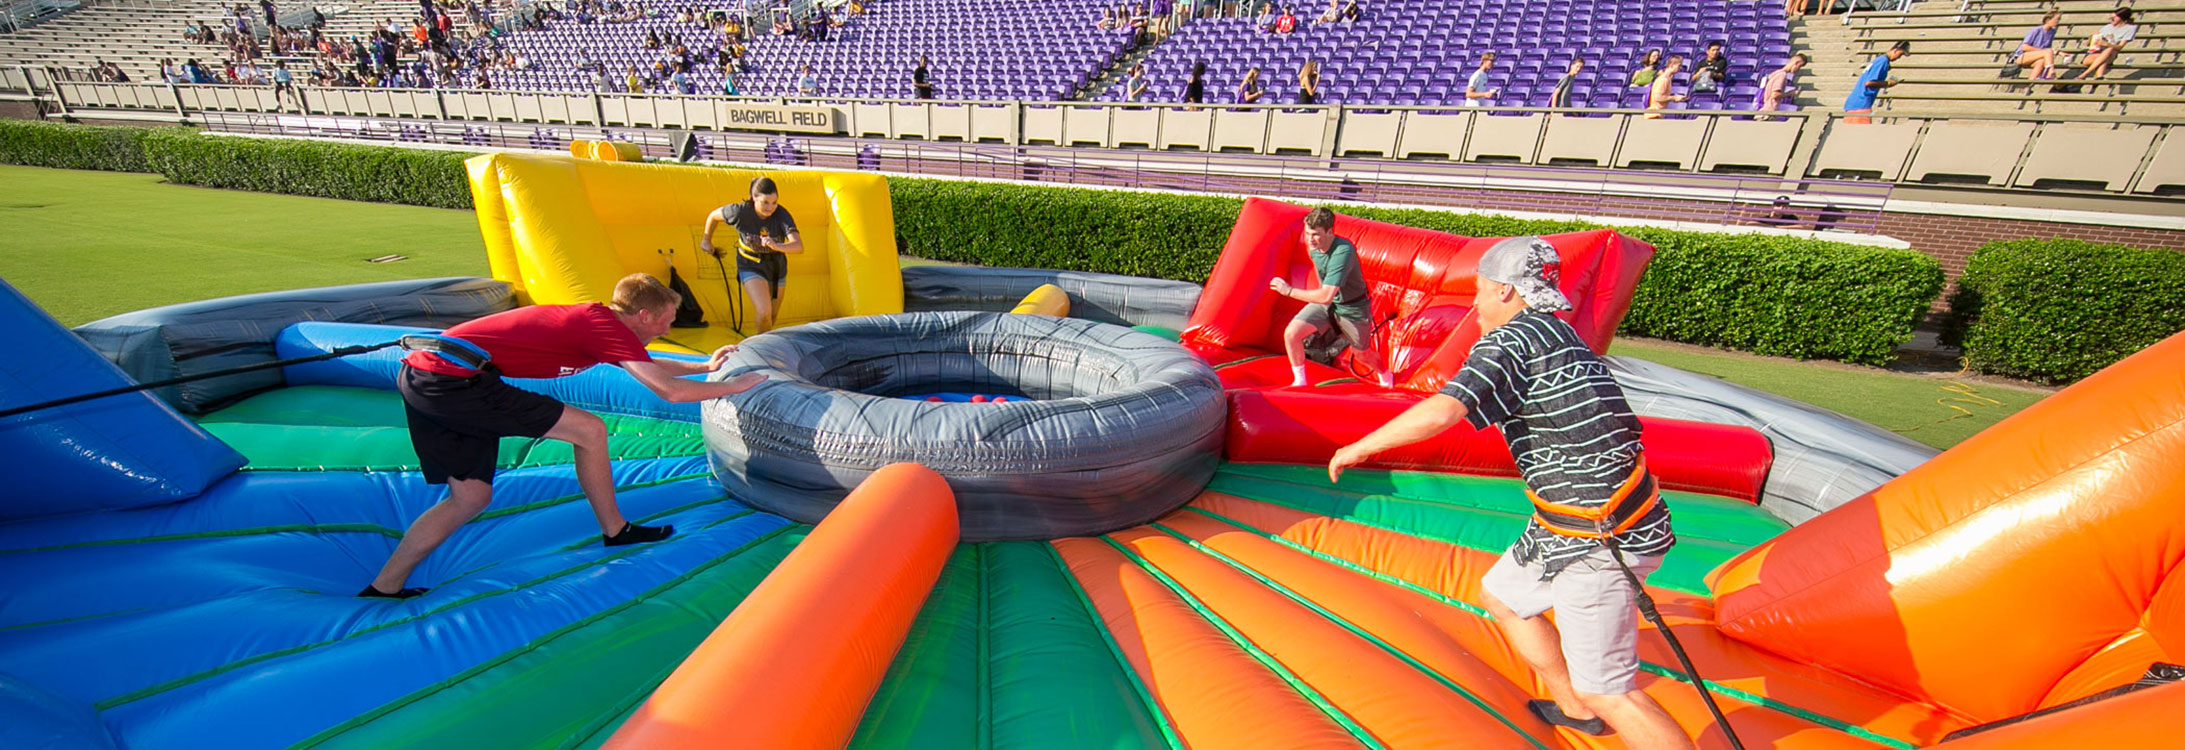 Students setting up an inflatable ride